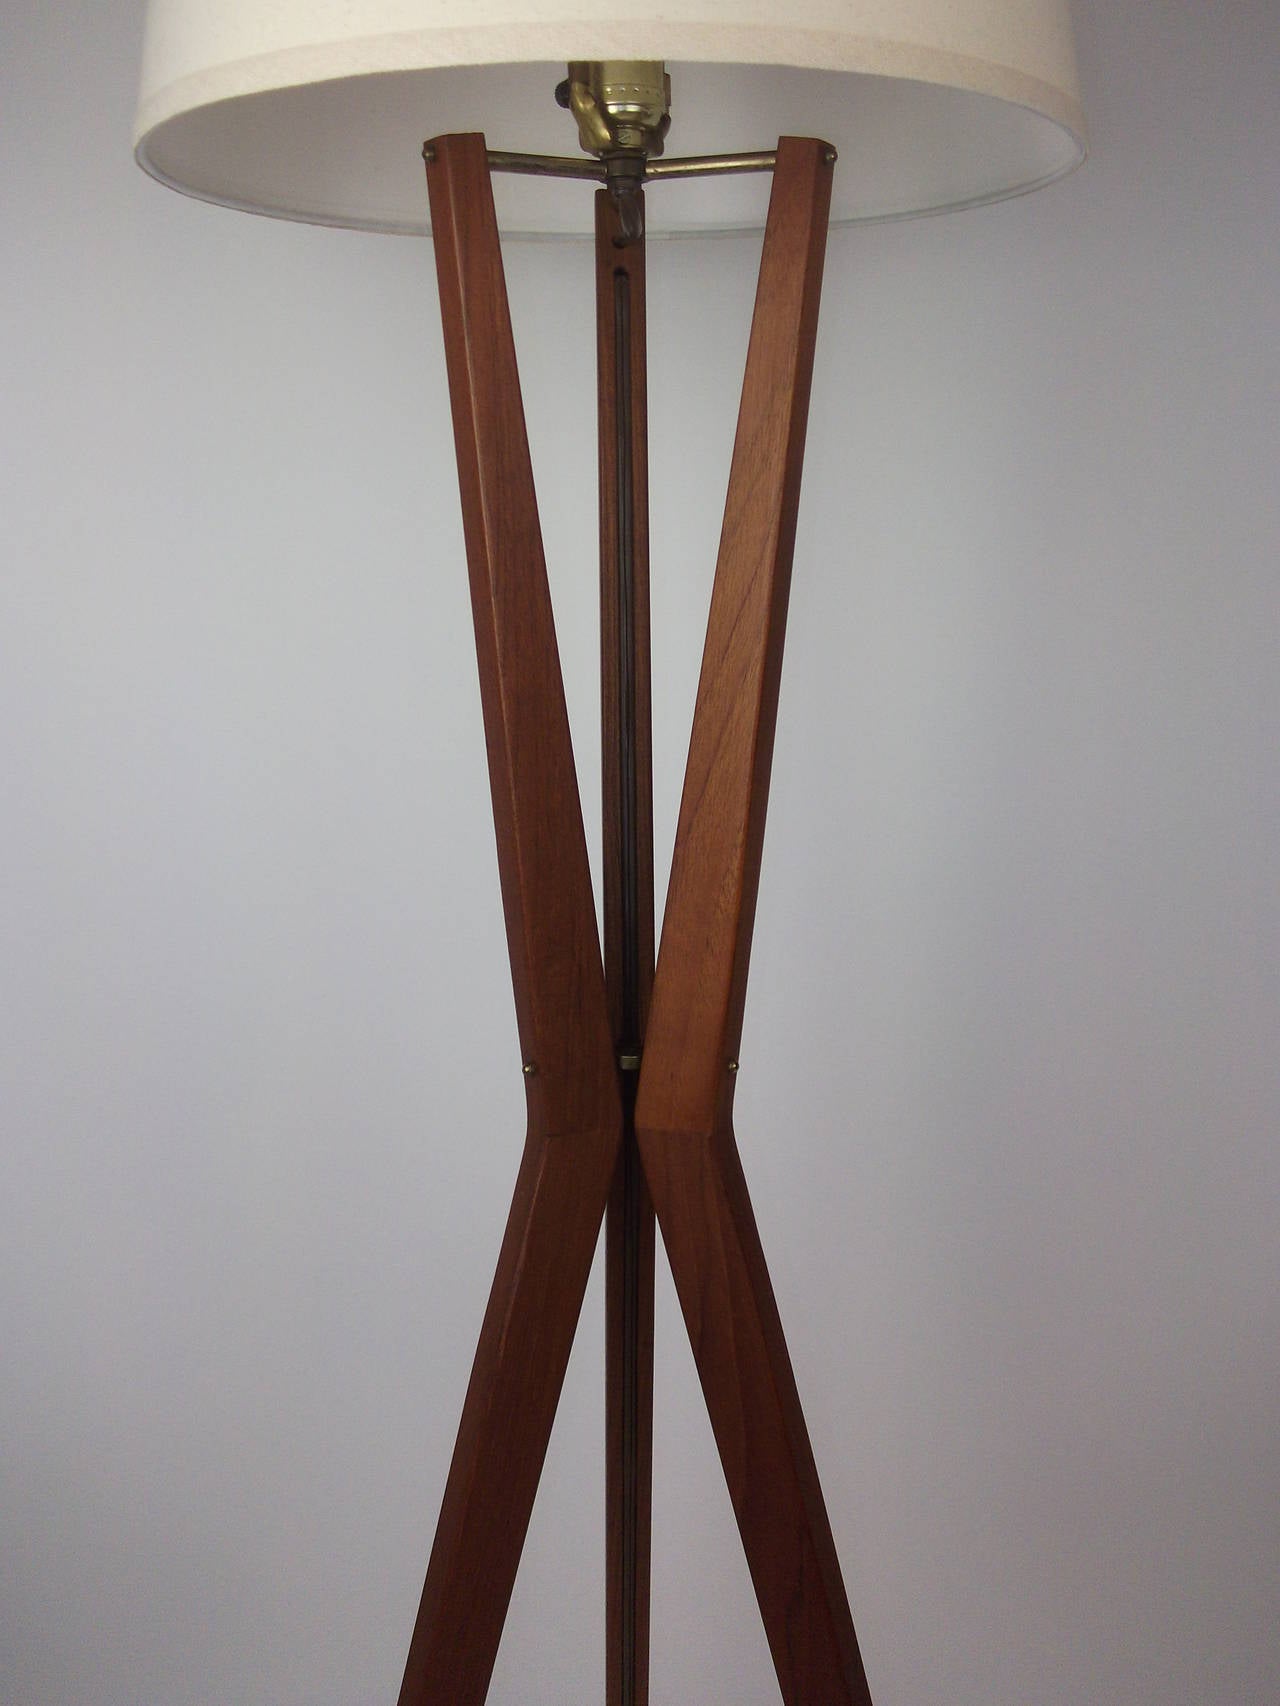 Striking 1960's Danish modern 3 legged teak floor lamp w/ brass detailing (hardware) - made in Denmark - lovely patina - fantastic condition- note one small crack at the top by the brass stretcher - see pic -comes with new custom lamp shade.